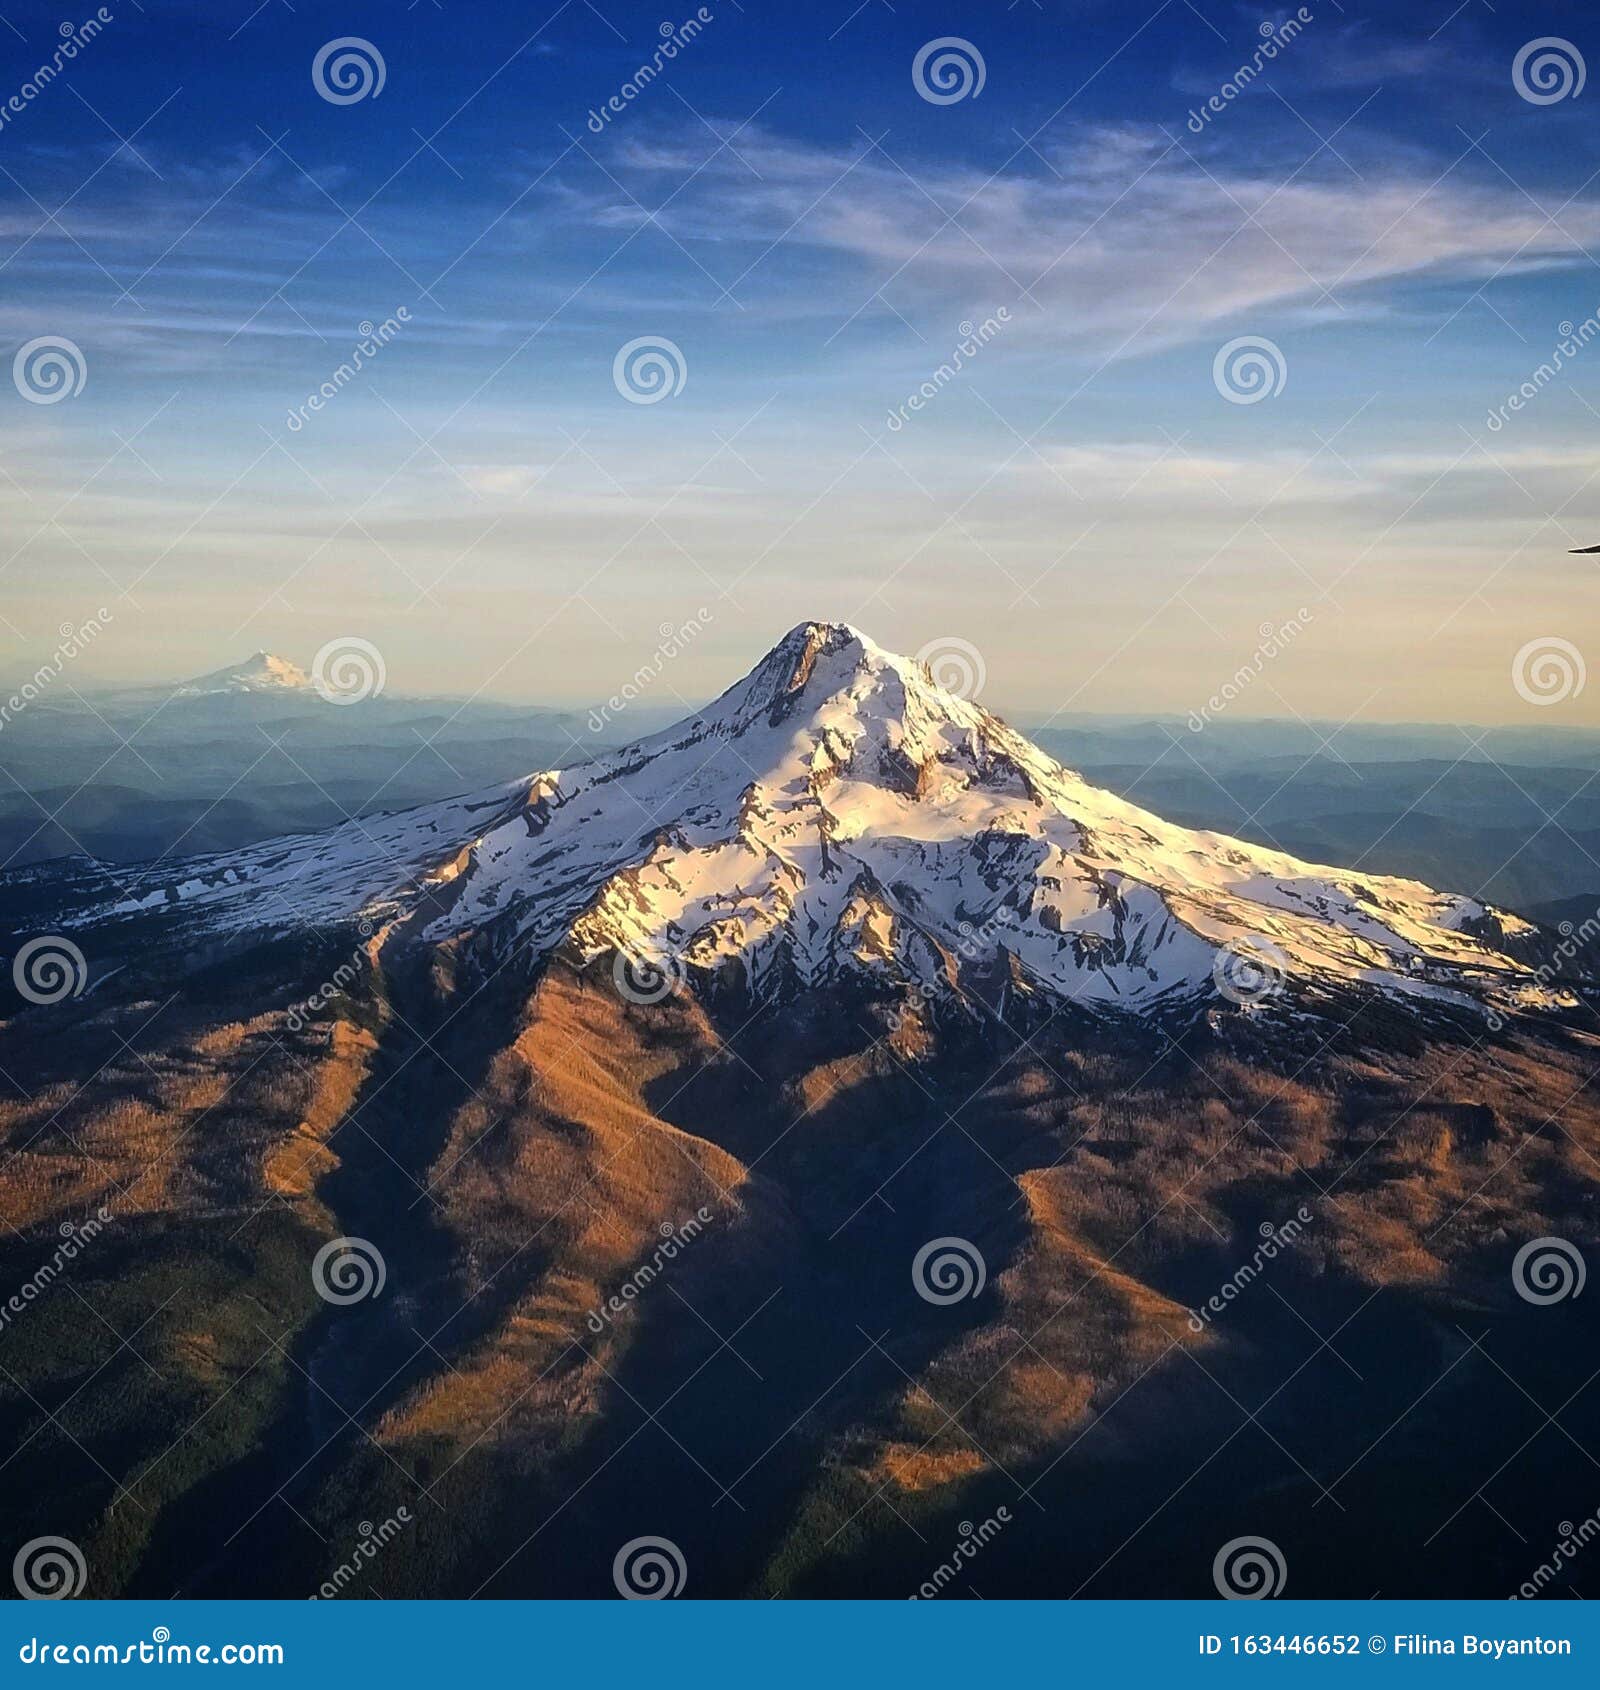 majestic mt. hood from above